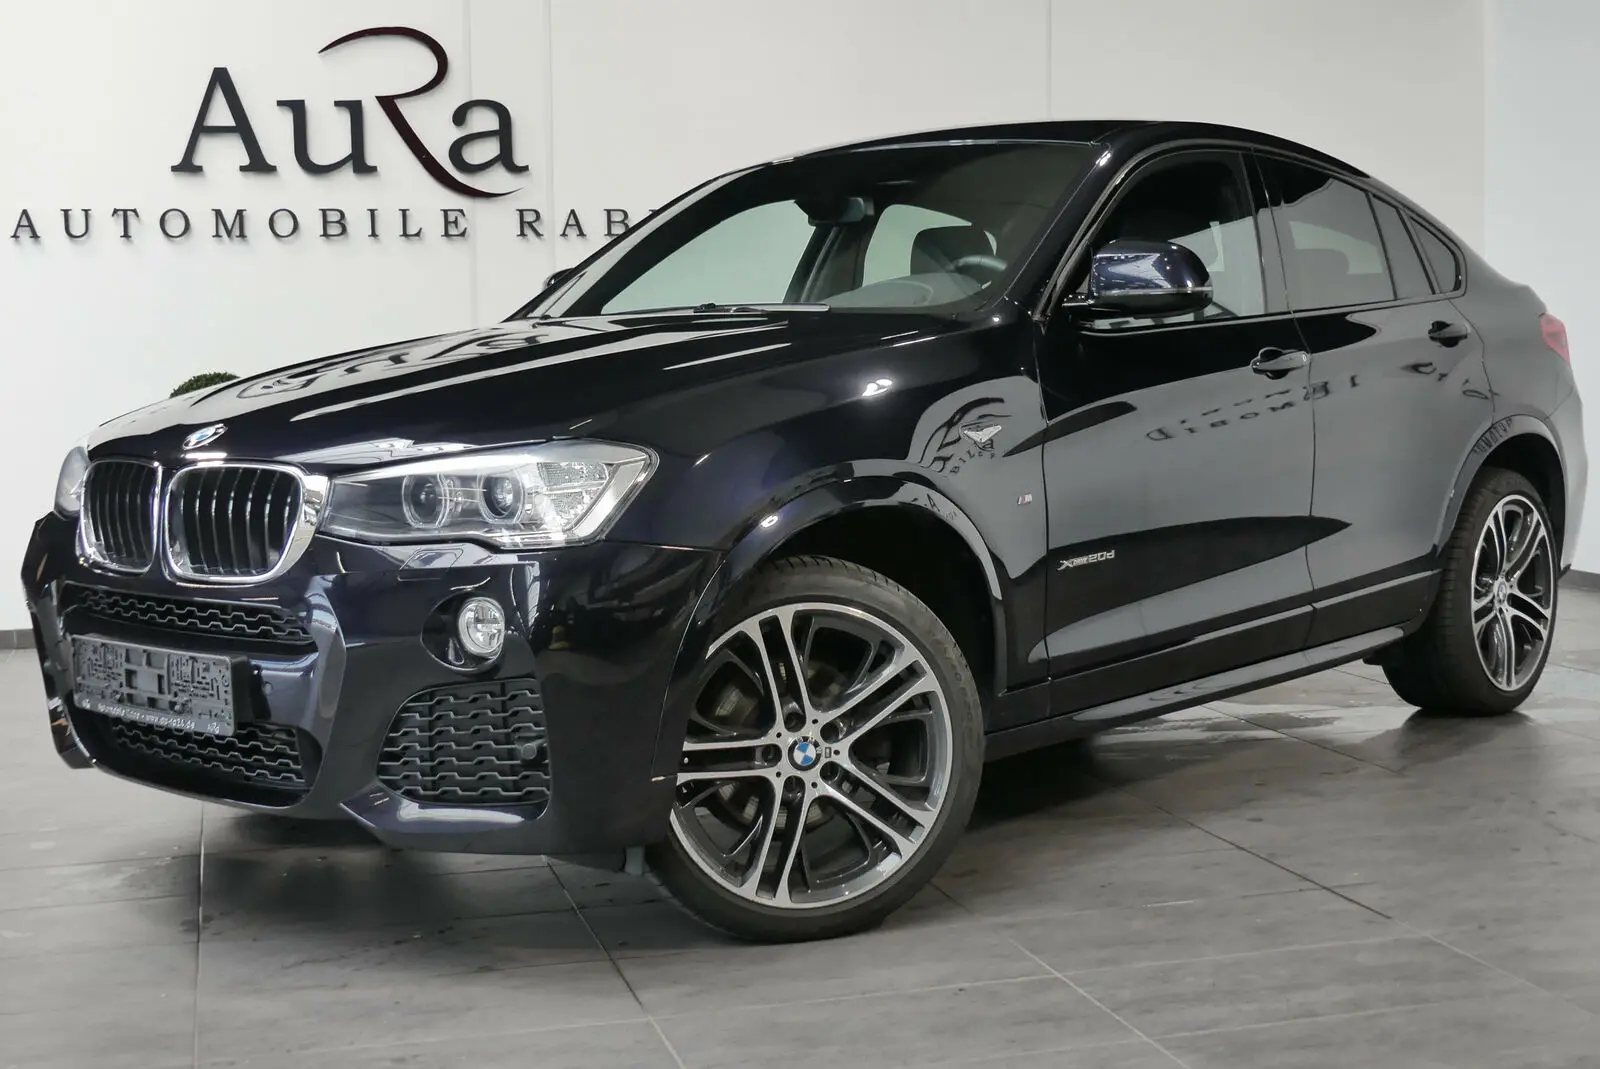 Good Quality At Cheap Used Car Price BMW X4 SUV / Off-road Vehicle / Pickup Truck Selling Used Car Online